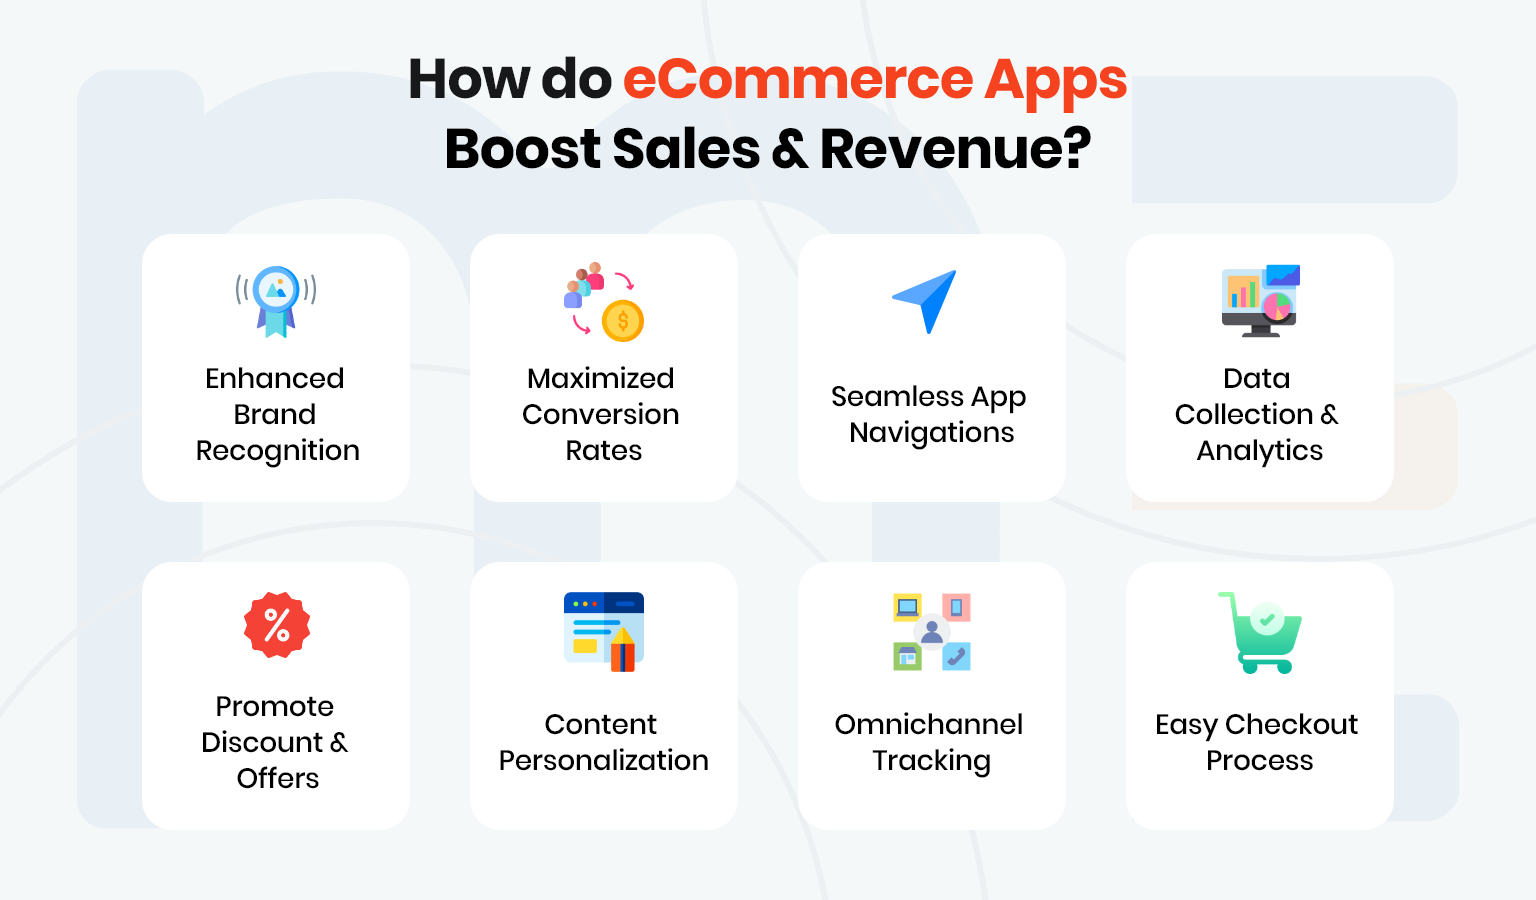 ai in customer experience- ecommerce app development trends